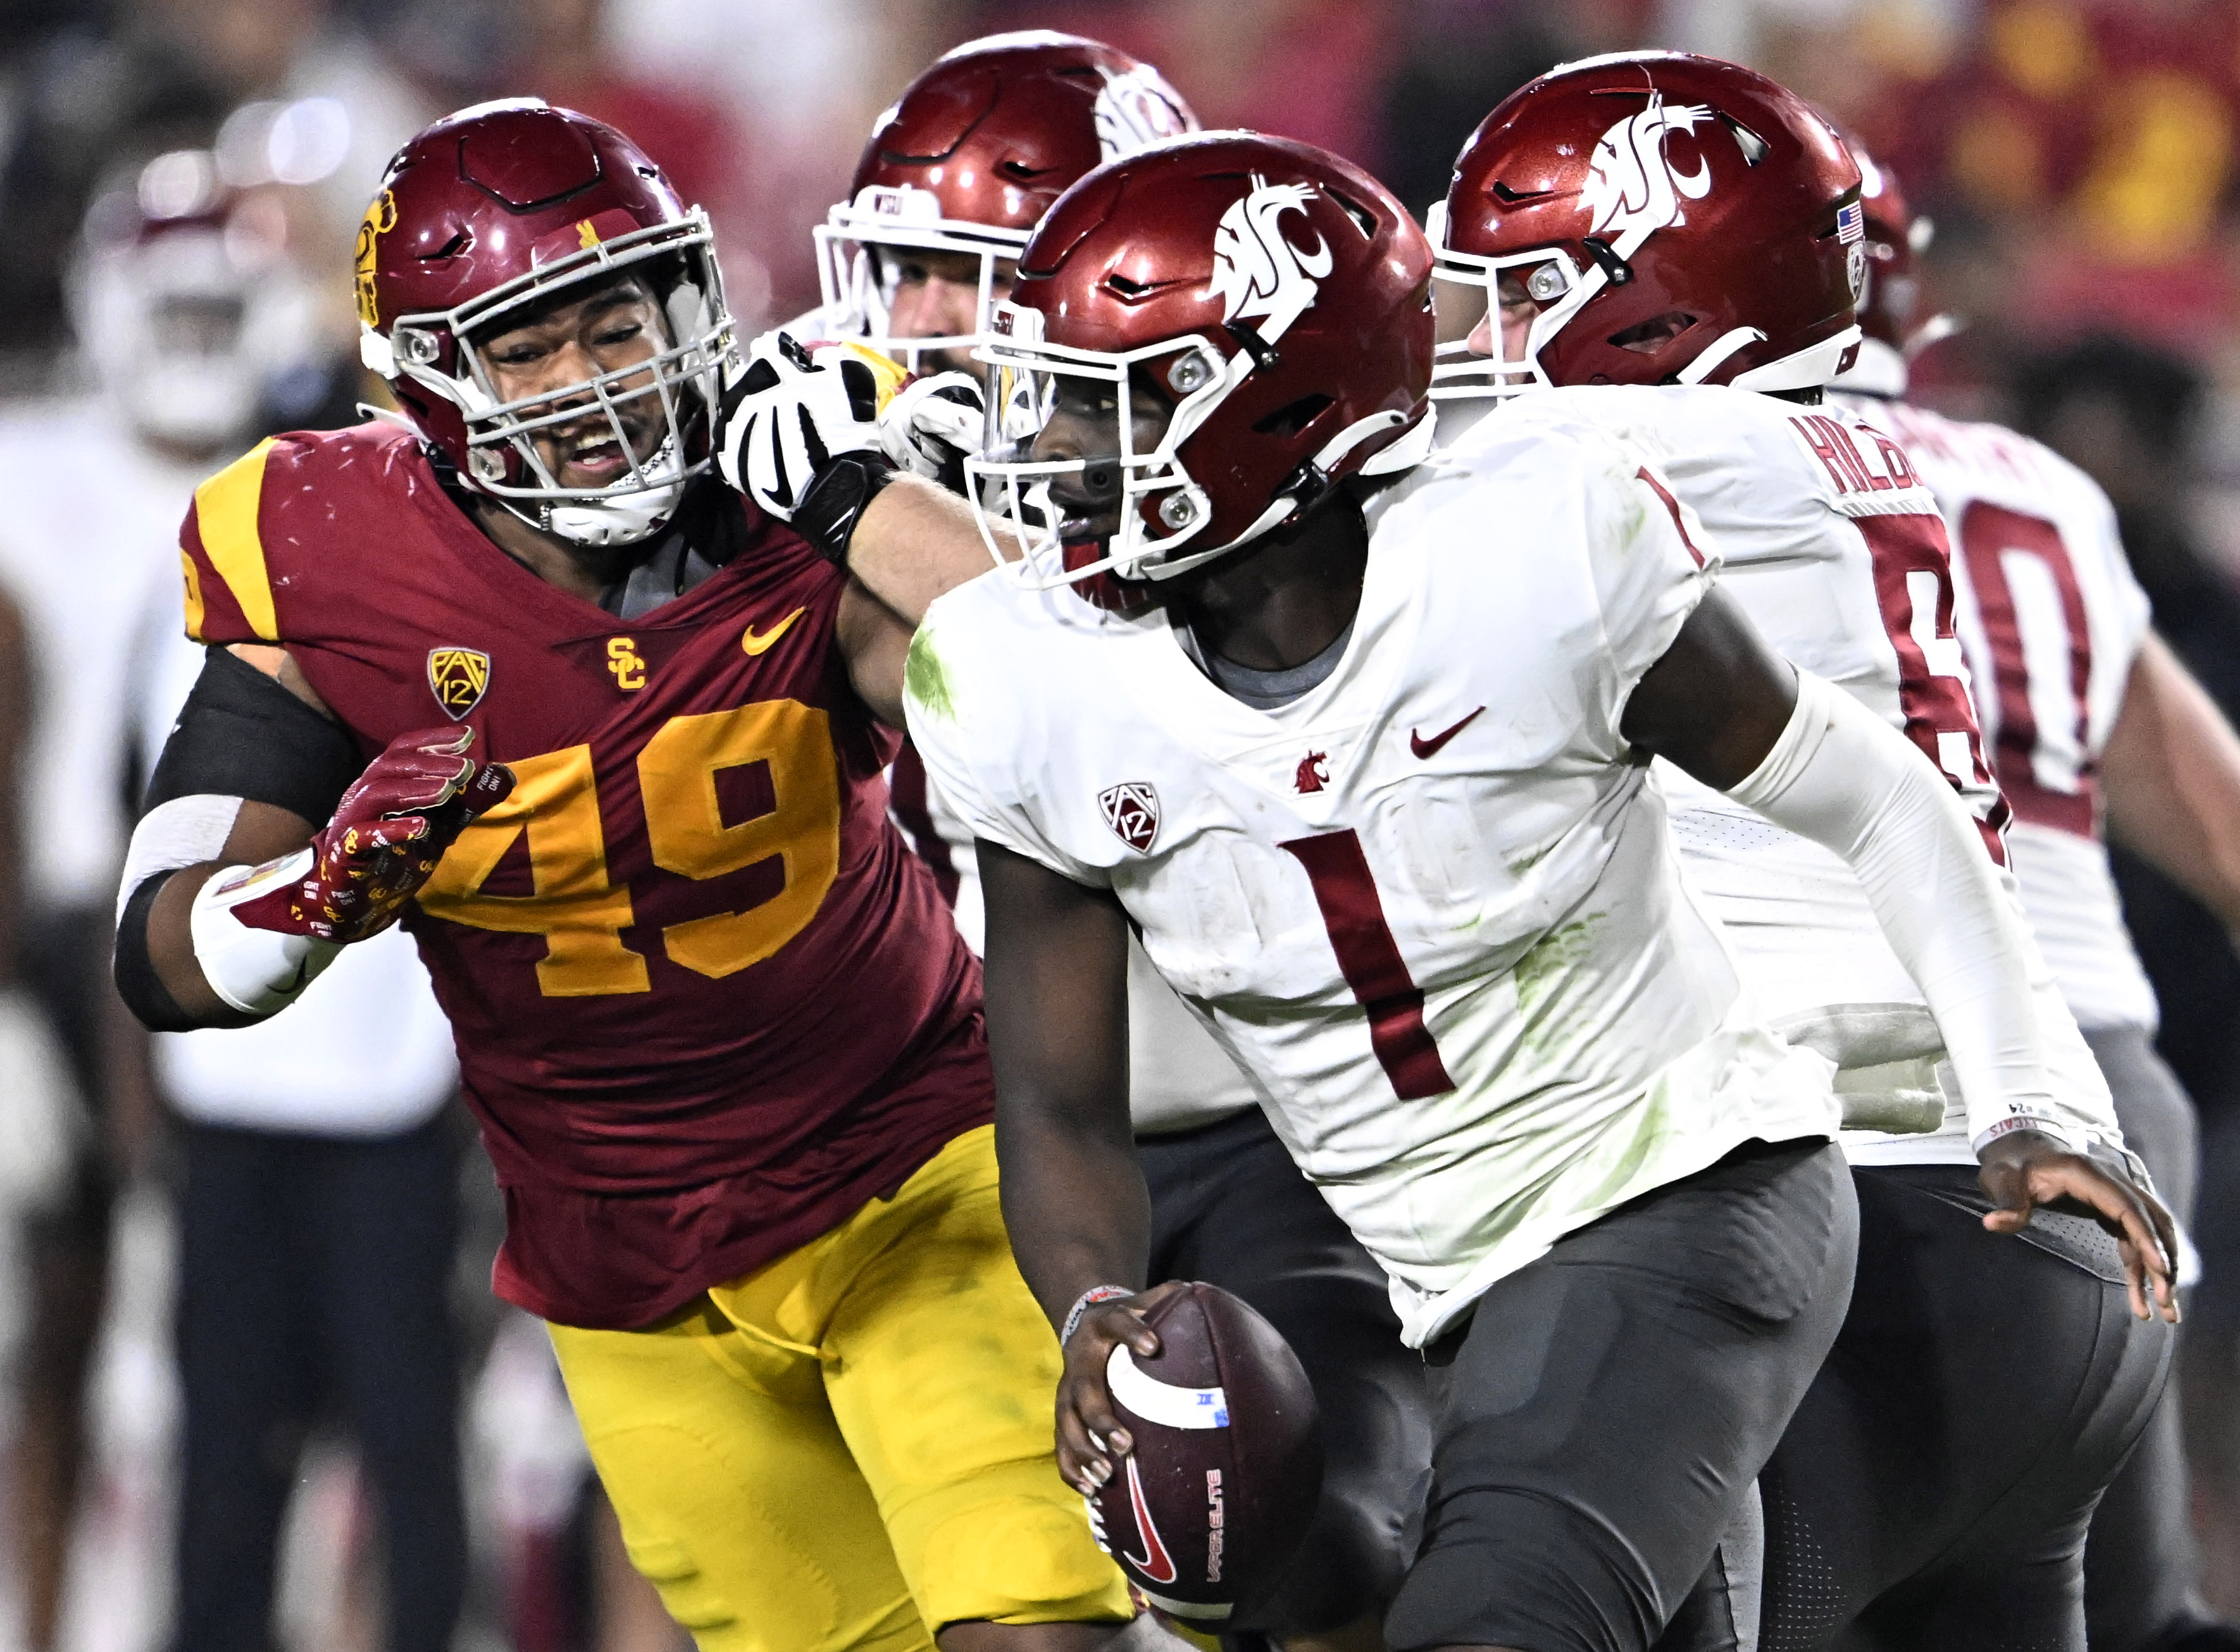 USC Trojans defeated the Washington State Cougars 30-14 during a NCAA football game.